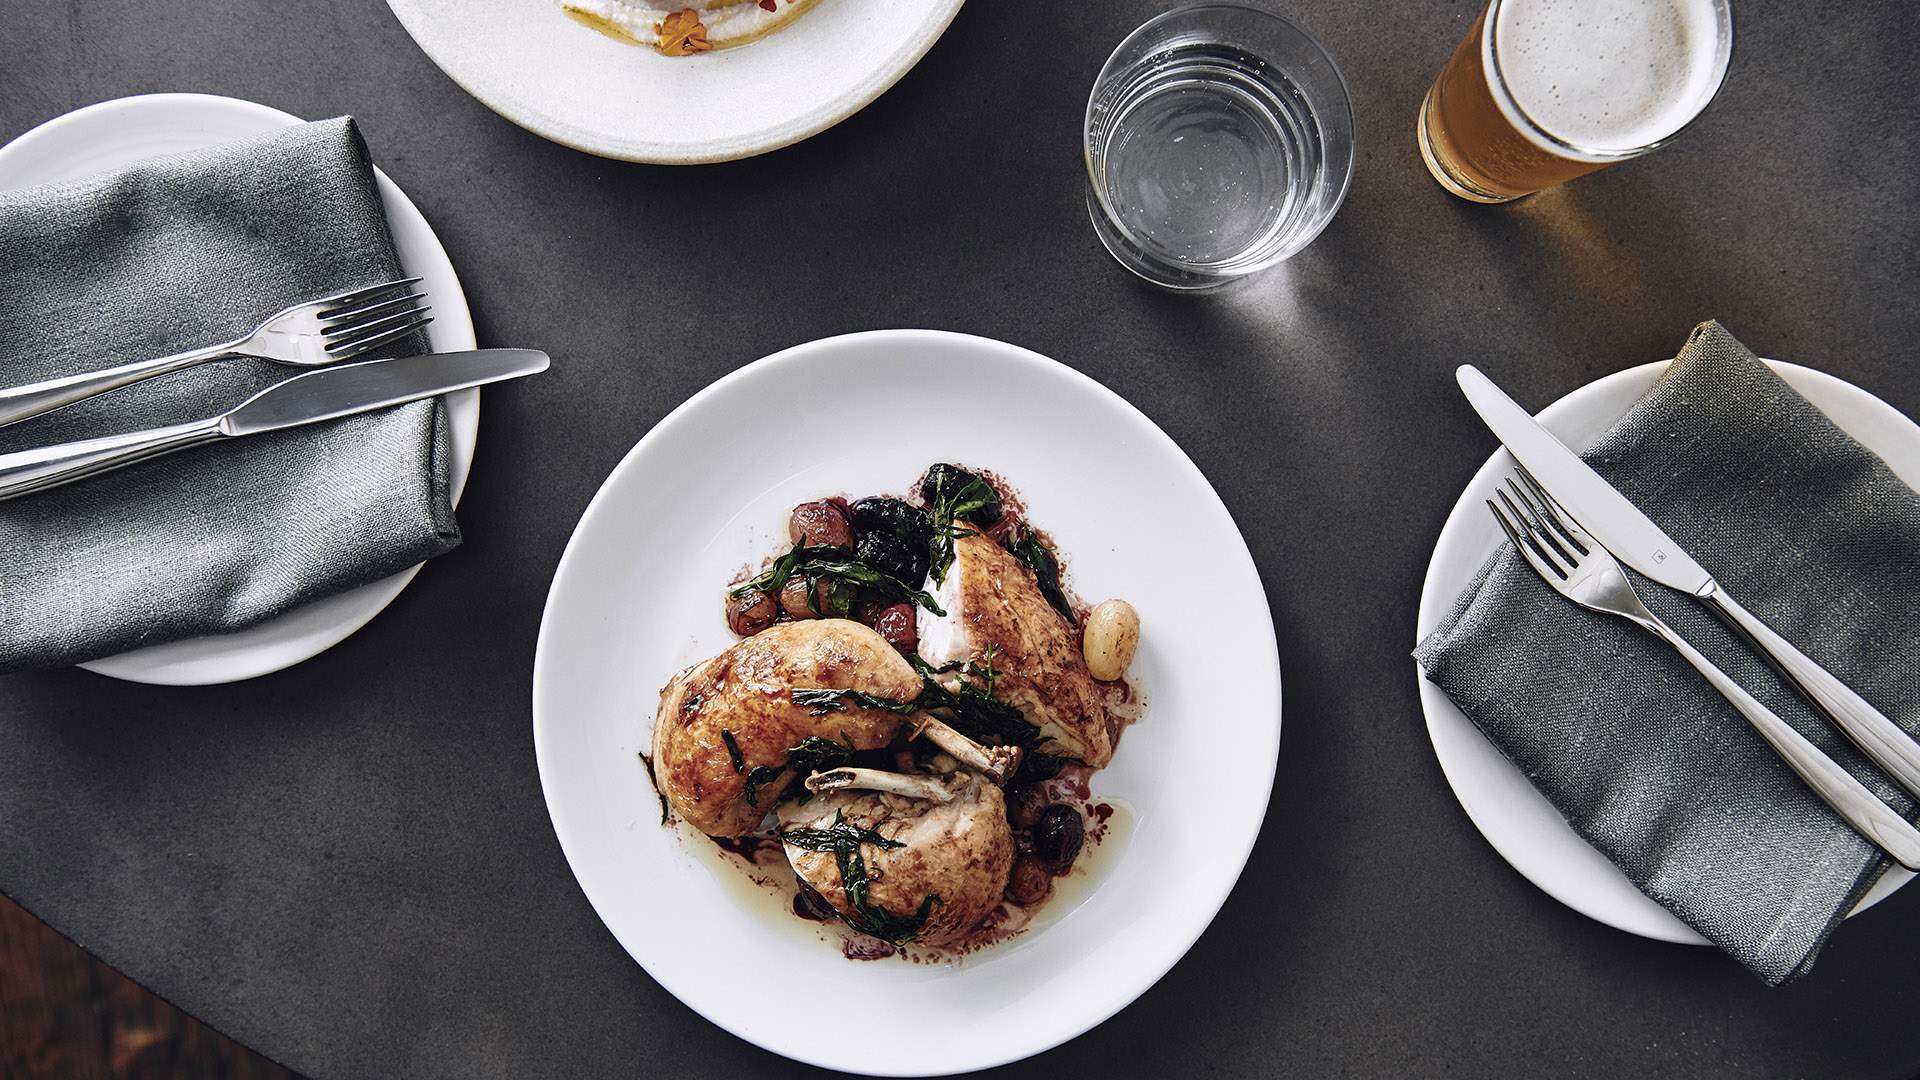 Caddie Is Richmond's New Locally-Focused Restaurant Headed Up by a Noma Alum